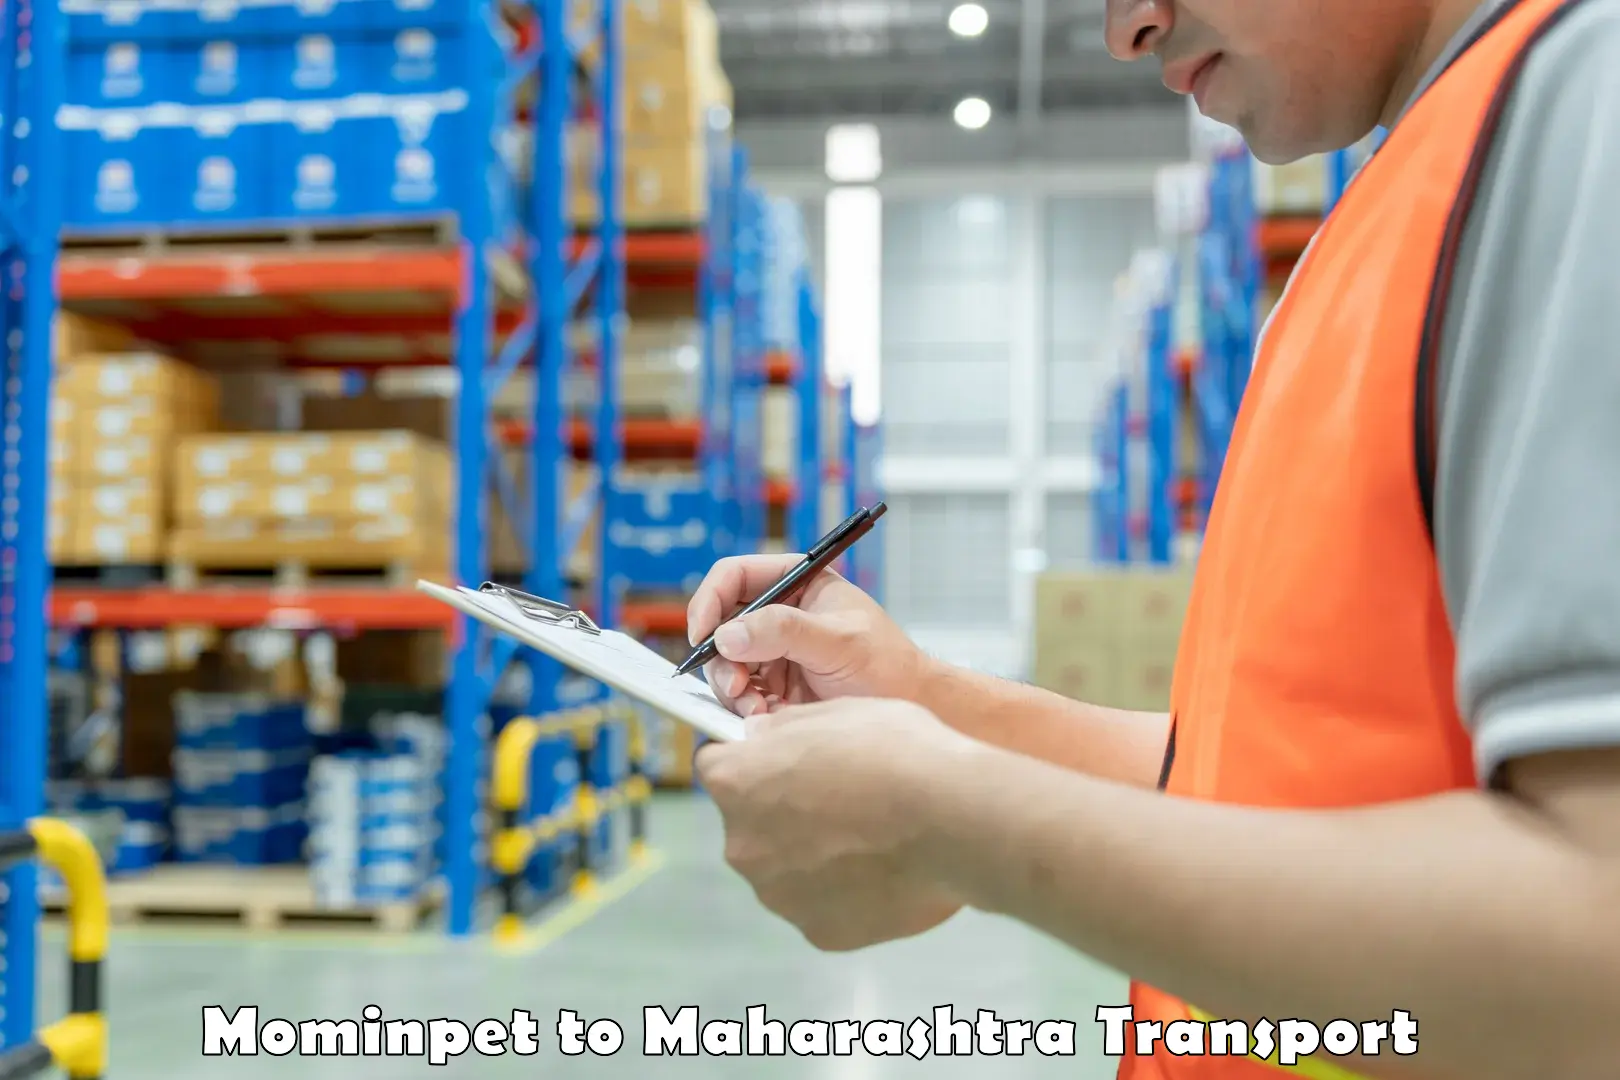 Goods delivery service Mominpet to Selu Sailu